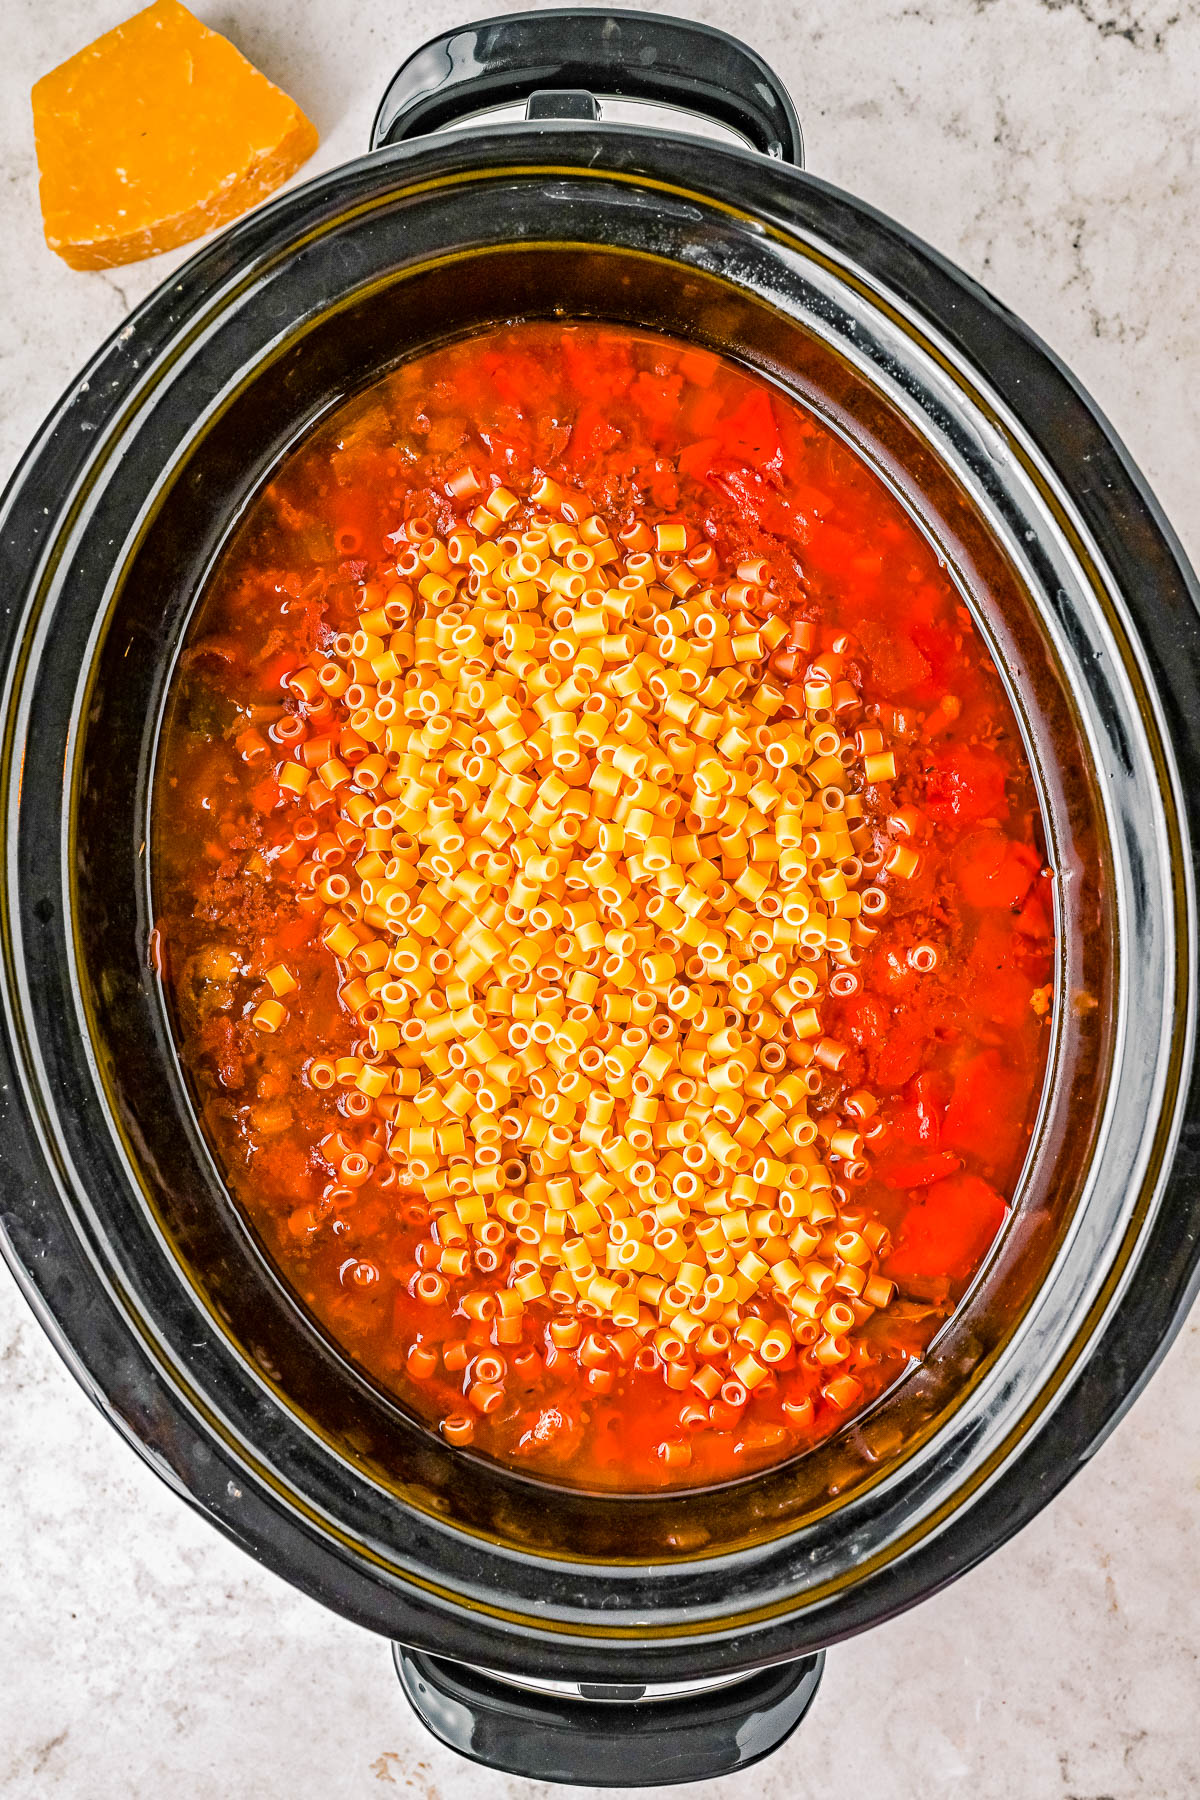 Slow Cooker Pasta e Fagioli Soup (Olive Garden Copycat) - My homemade recipe for this famous soup is even BETTER than the restaurant version and SO EASY thanks to your Crock-Pot! Complete with ground beef (or sausage), vegetables, spices, and pasta. Hearty comfort food that'll become a family FAVORITE in no time! Stovetop cooking directions also provided.